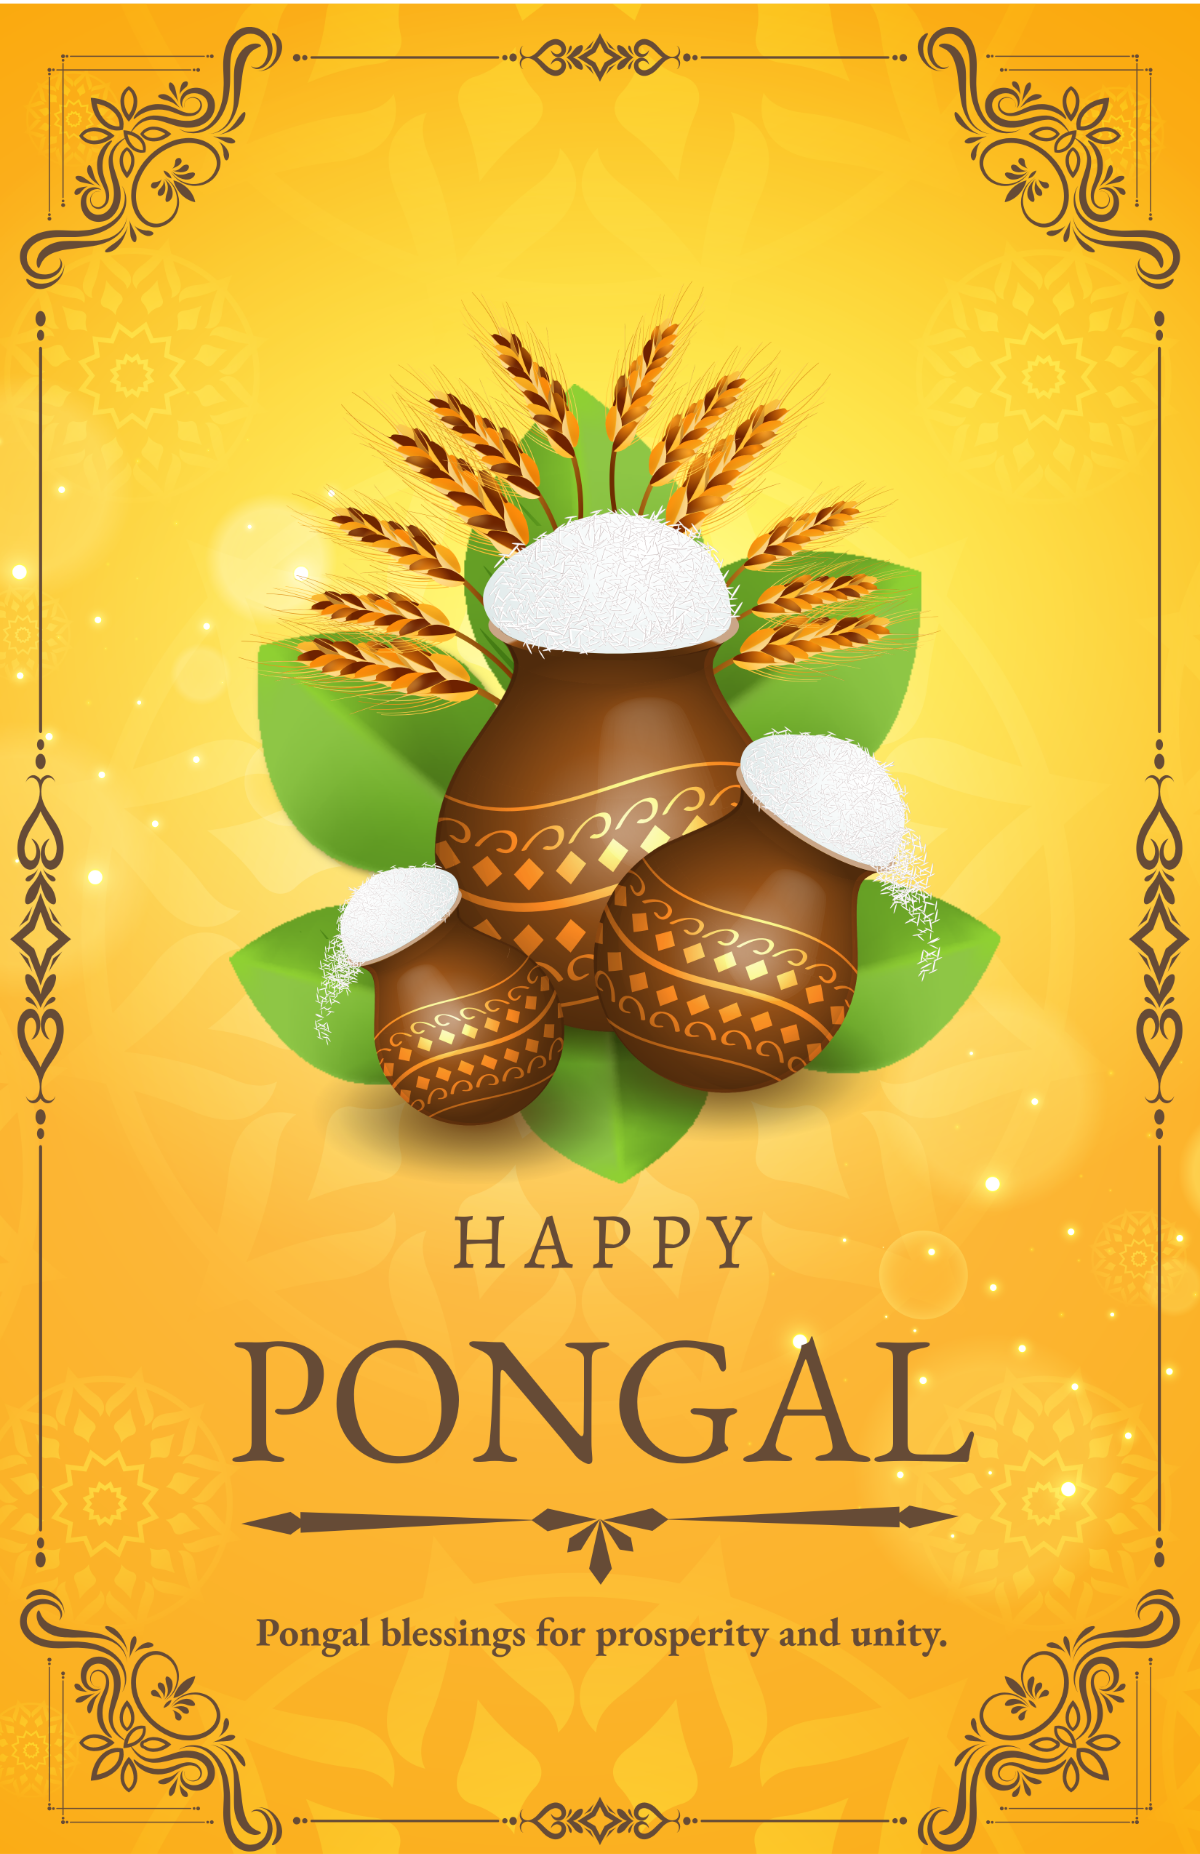 Happy Pongal Poster Template